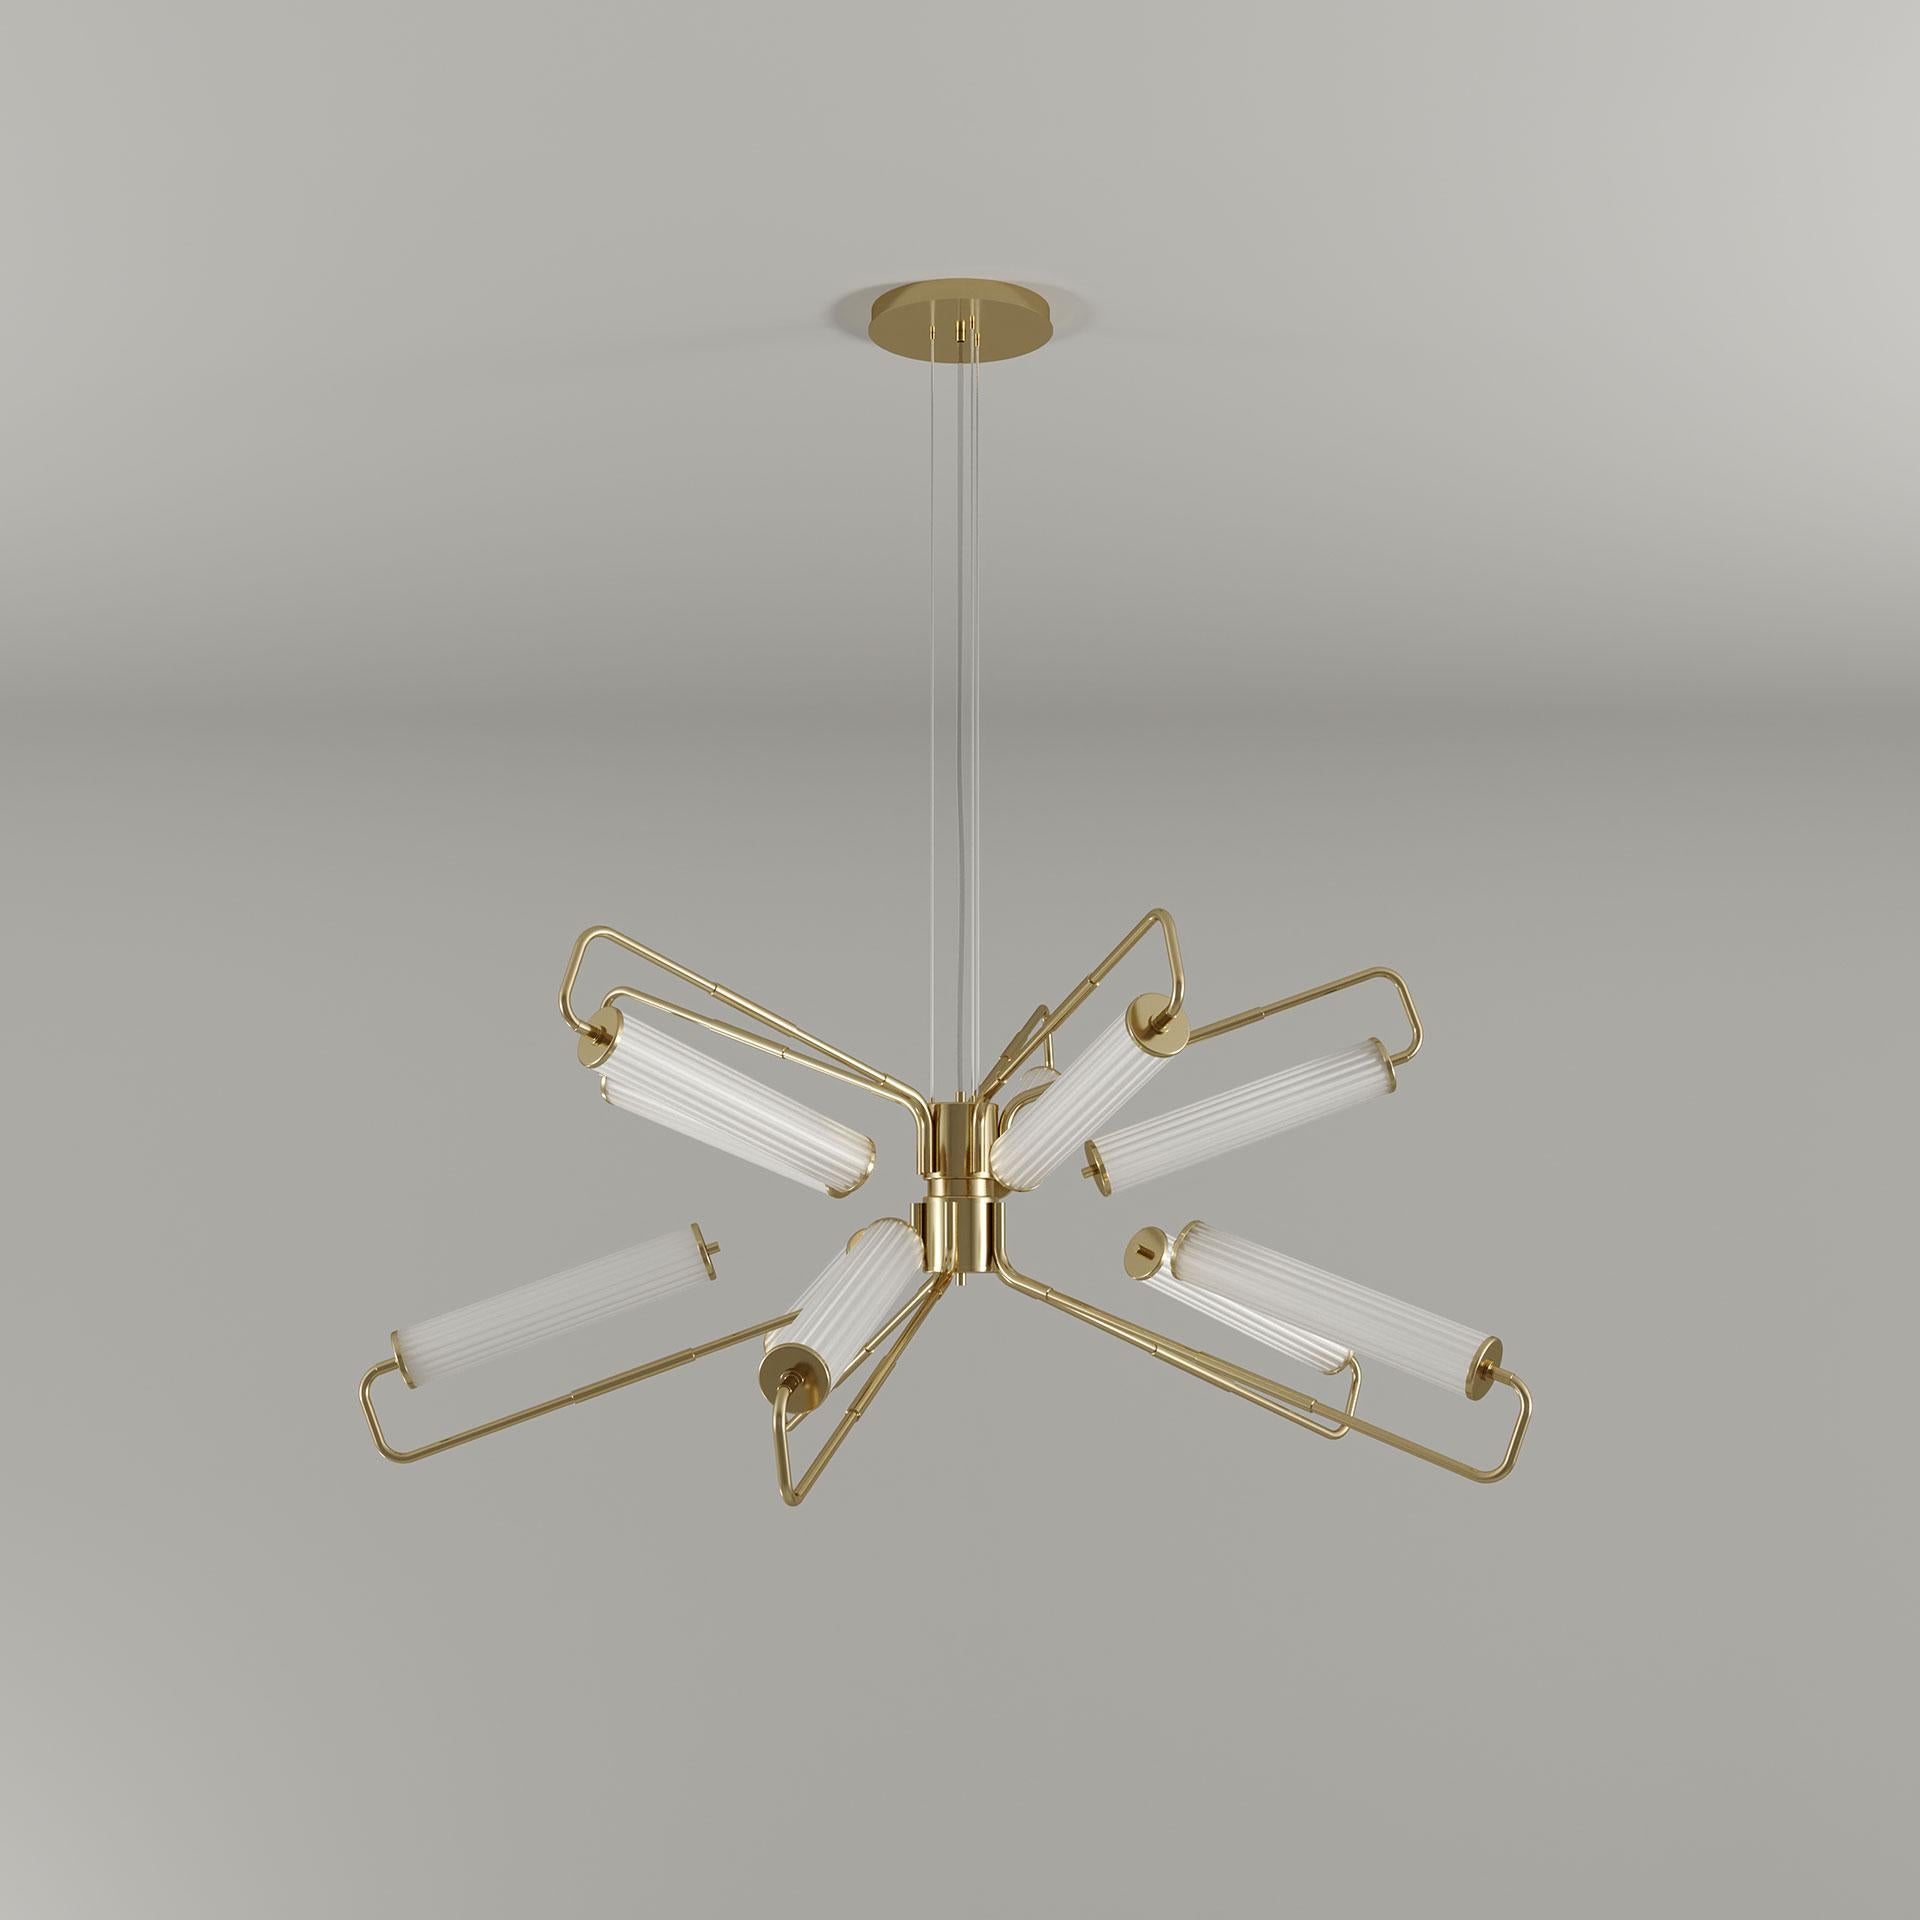 Contemporary 21st Century Miami I Suspension Lamp Fluted Glass Brass by Creativemary For Sale